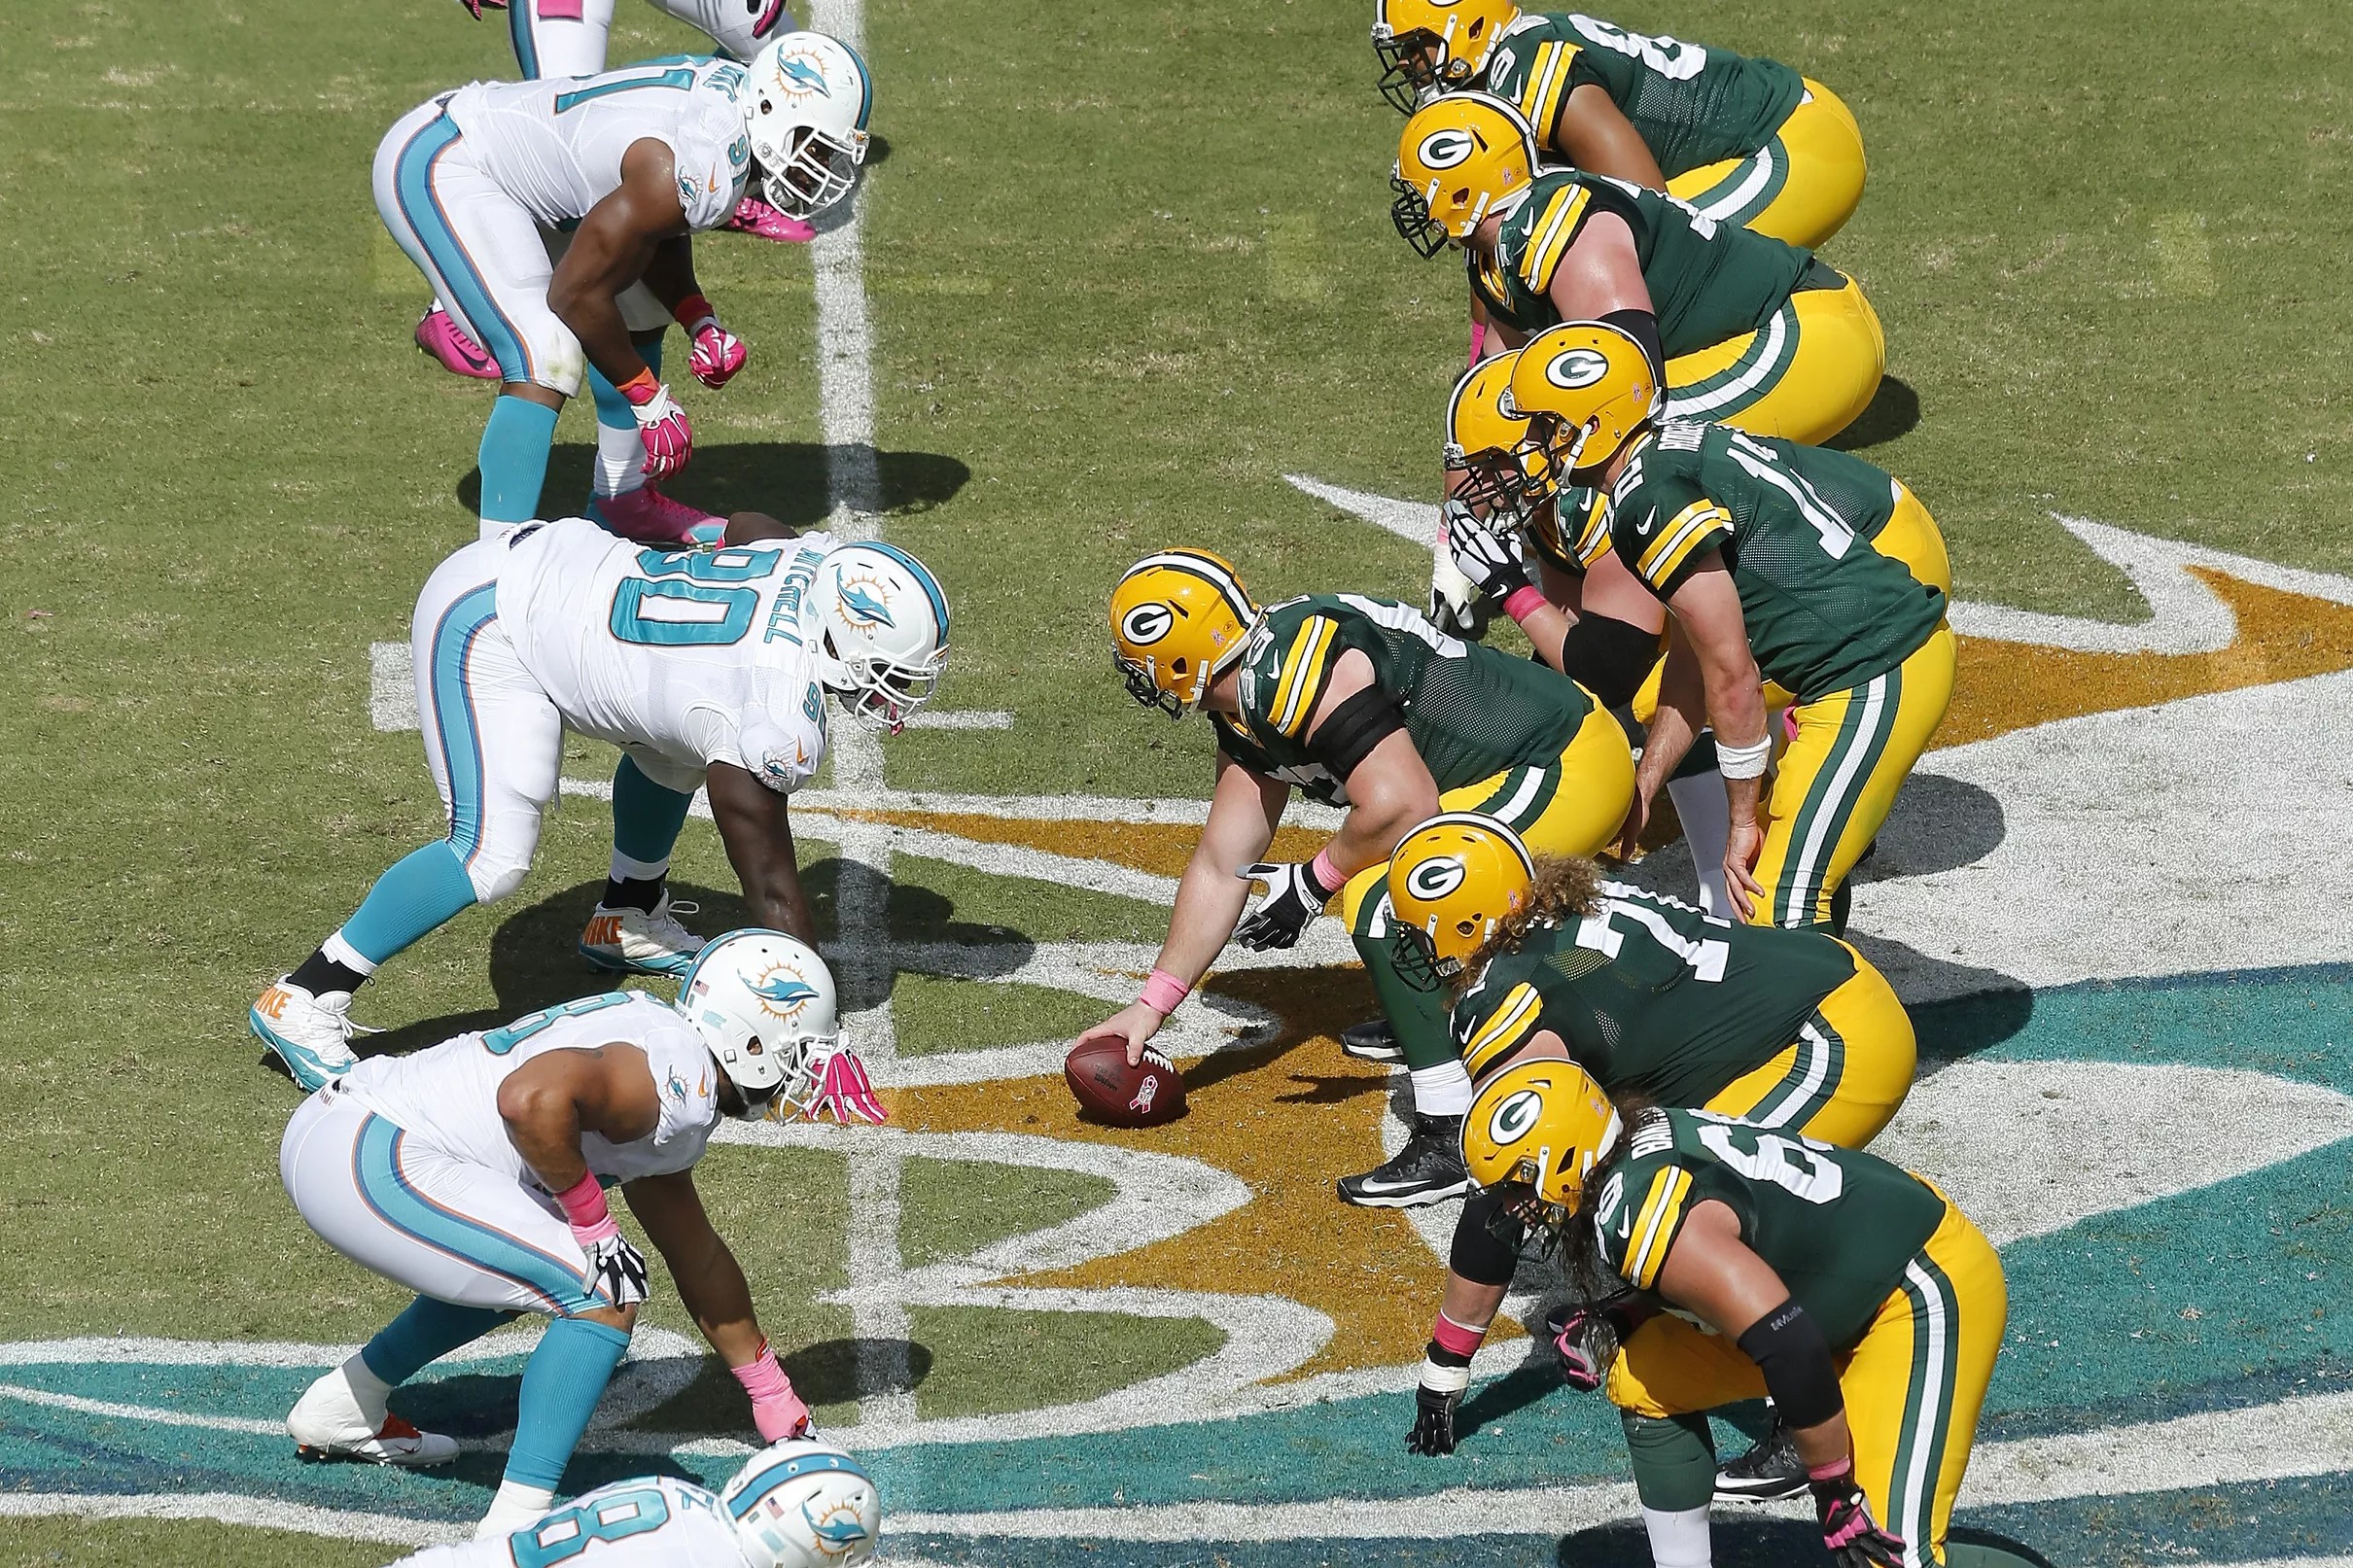 Packers-Dolphins Week 10 game flexed to 3:25 PM CT kickoff